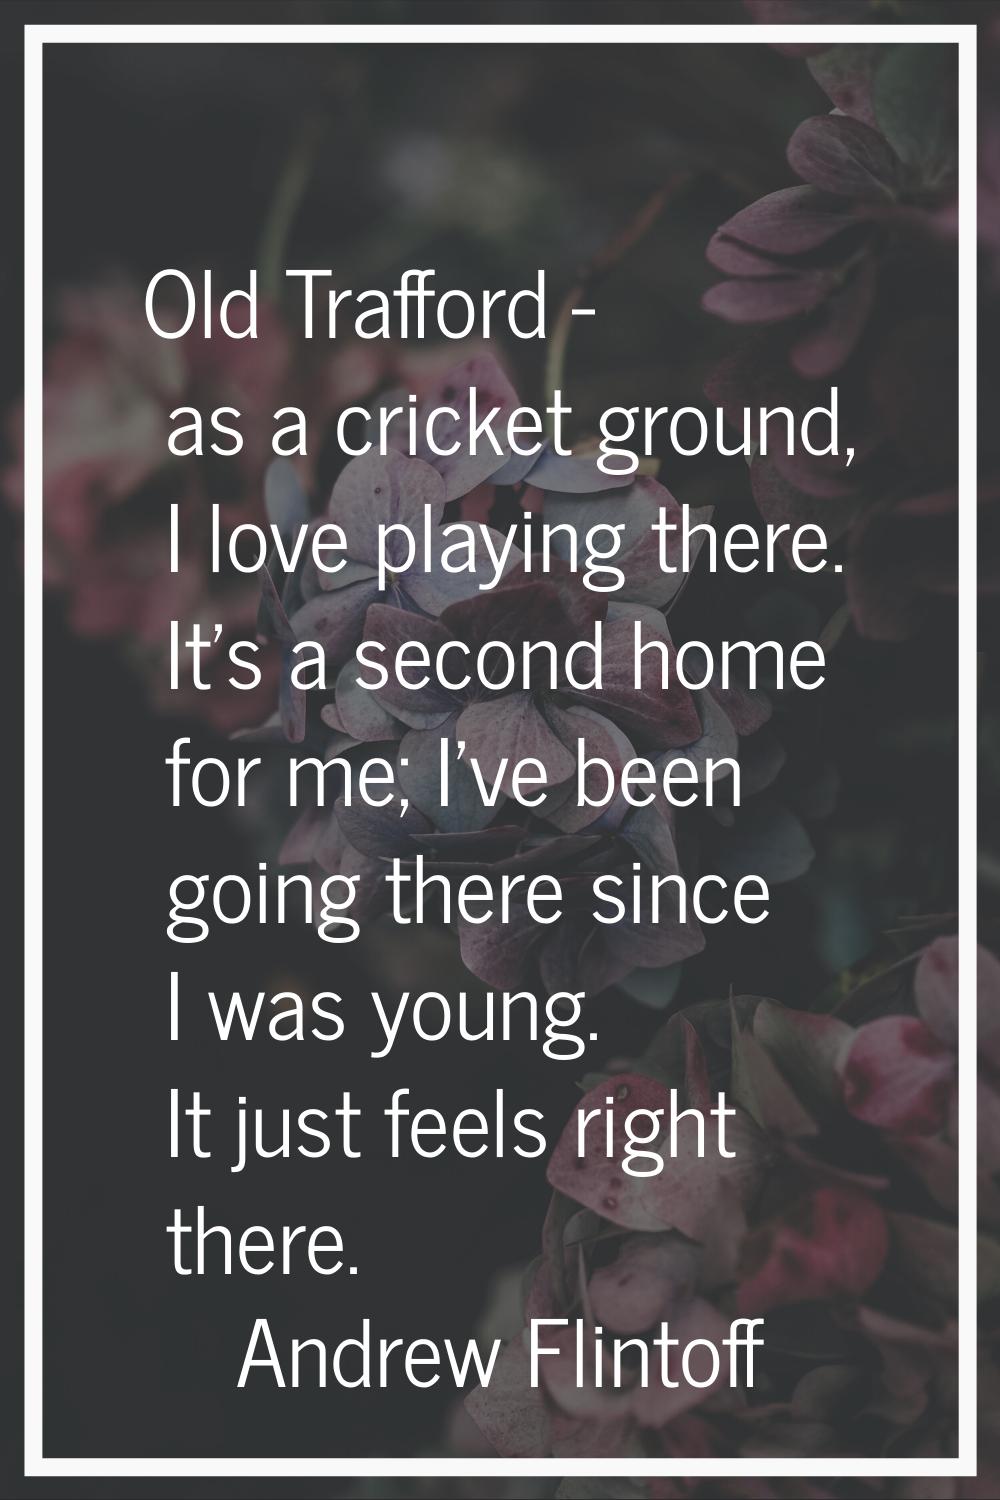 Old Trafford - as a cricket ground, I love playing there. It's a second home for me; I've been goin